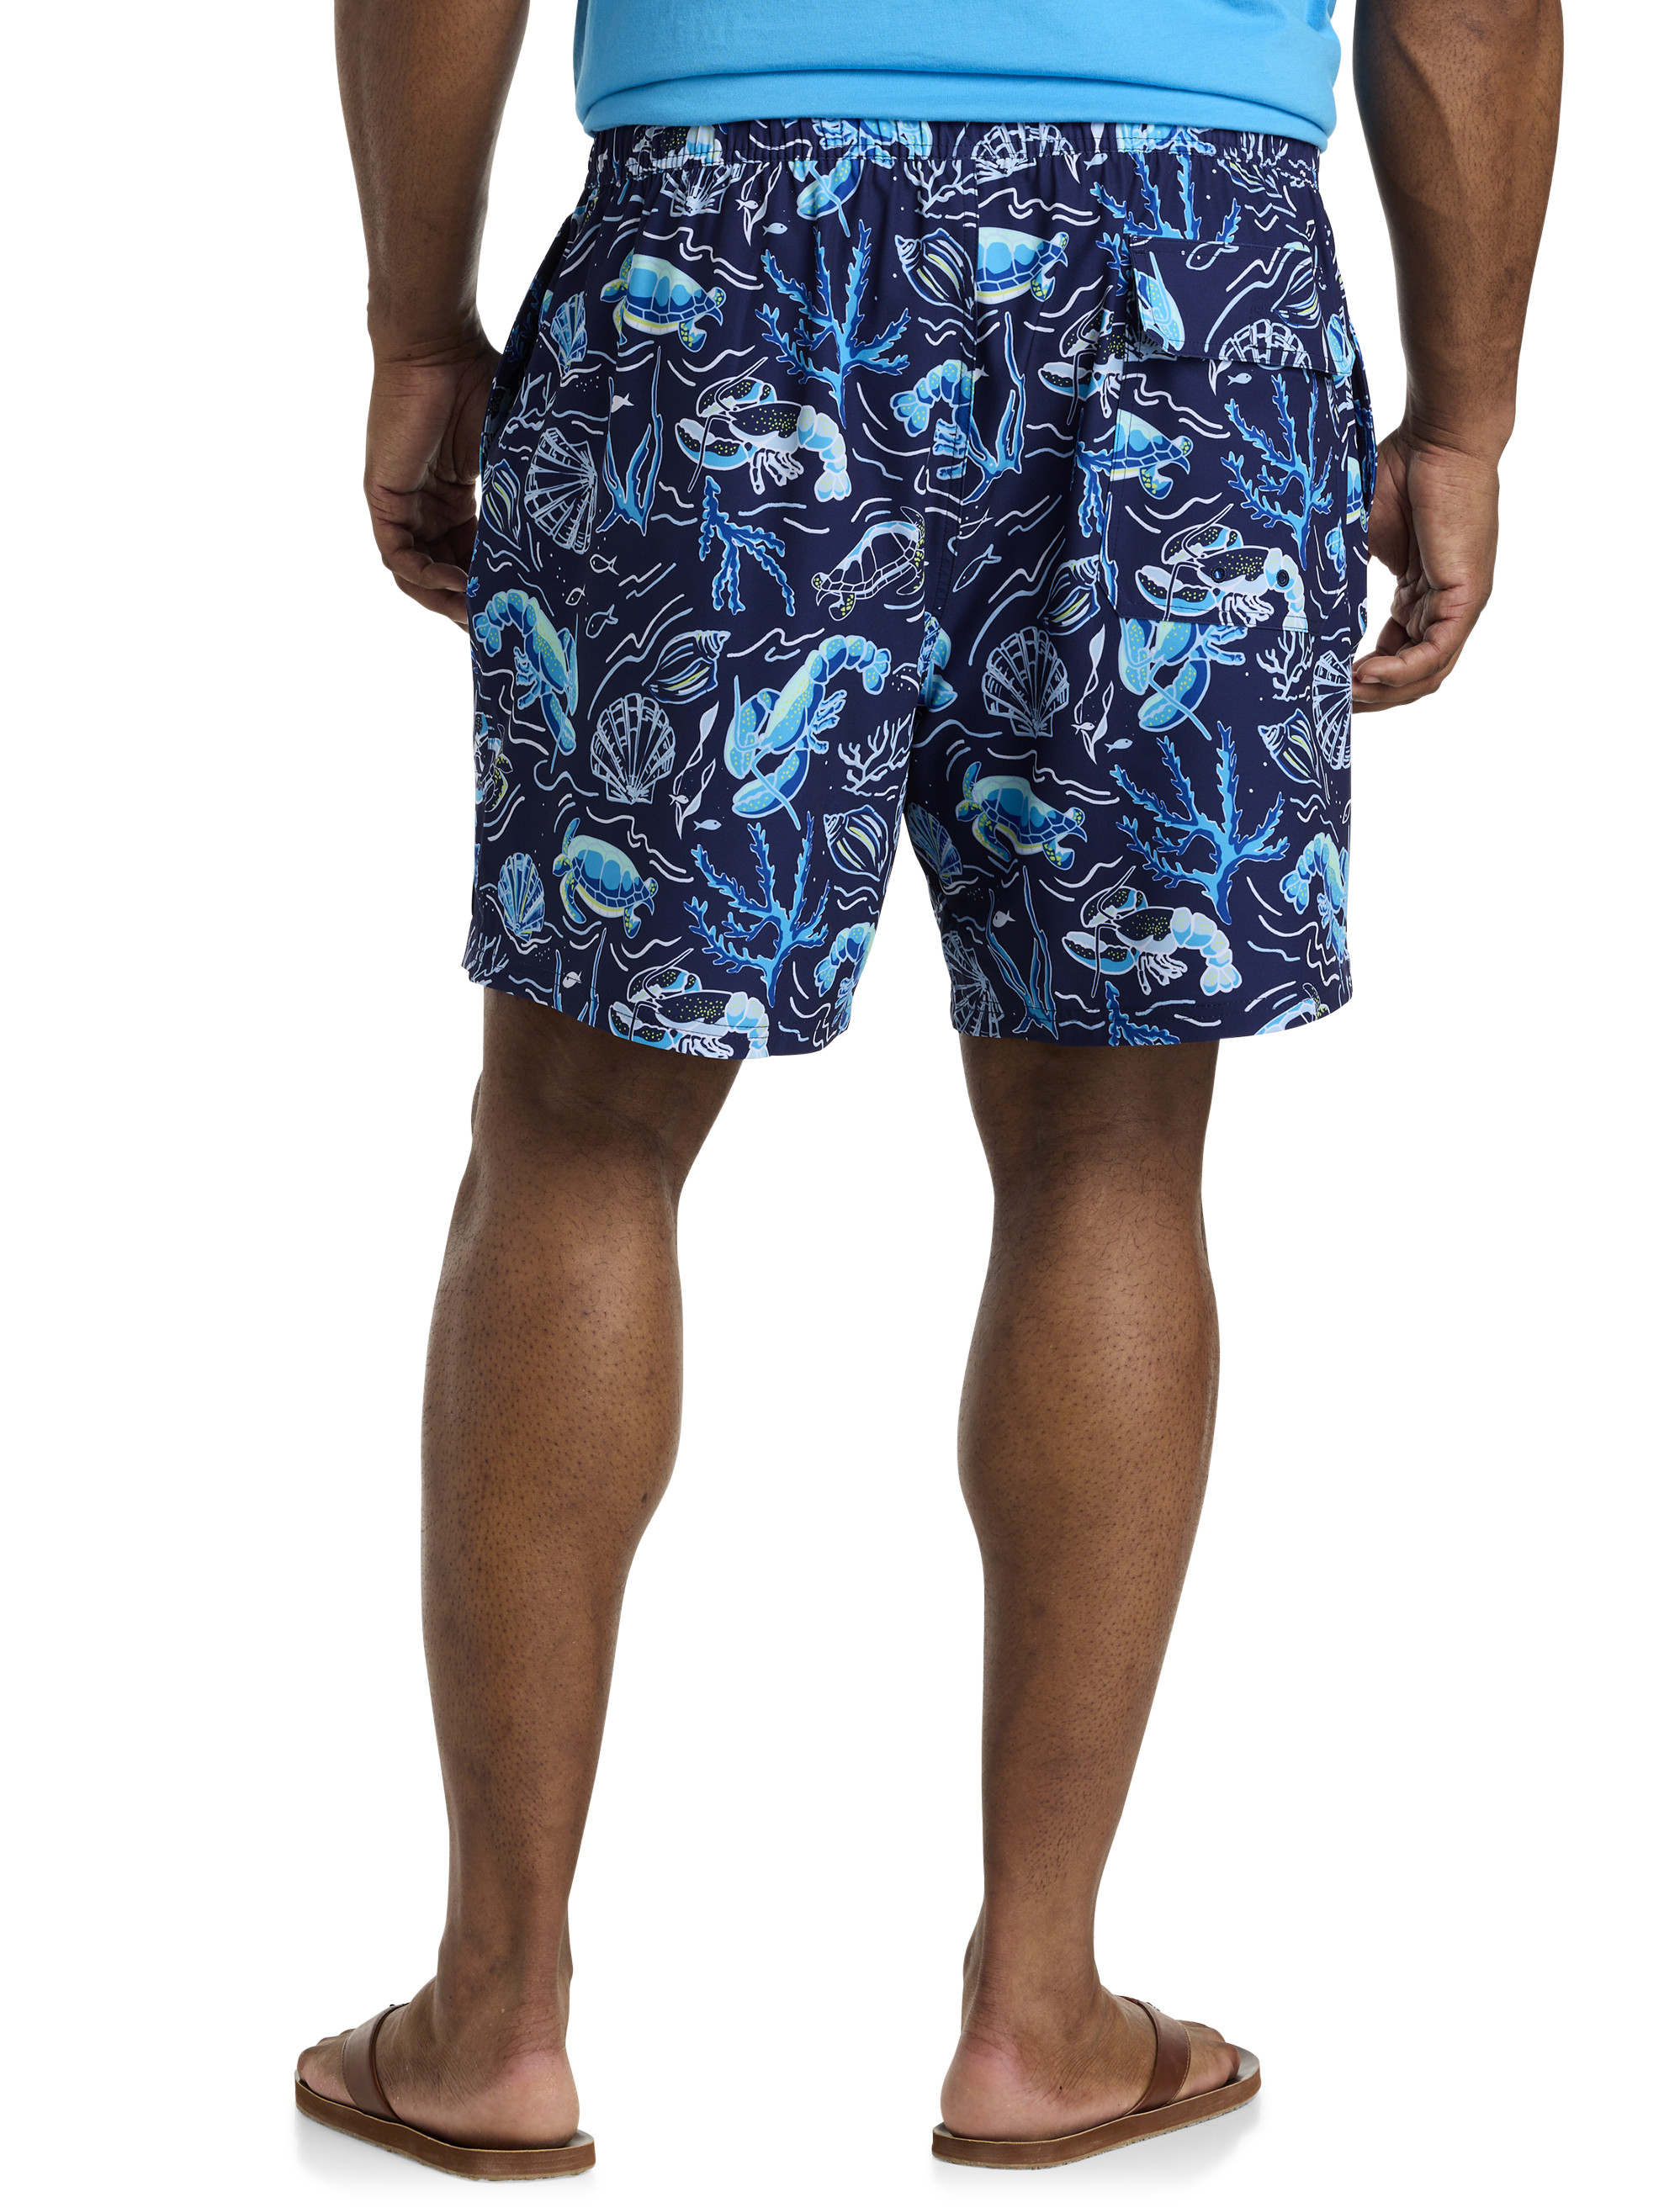 UKAP Men's Big and Tall Board Shorts Swim Trunks with Side Pocket